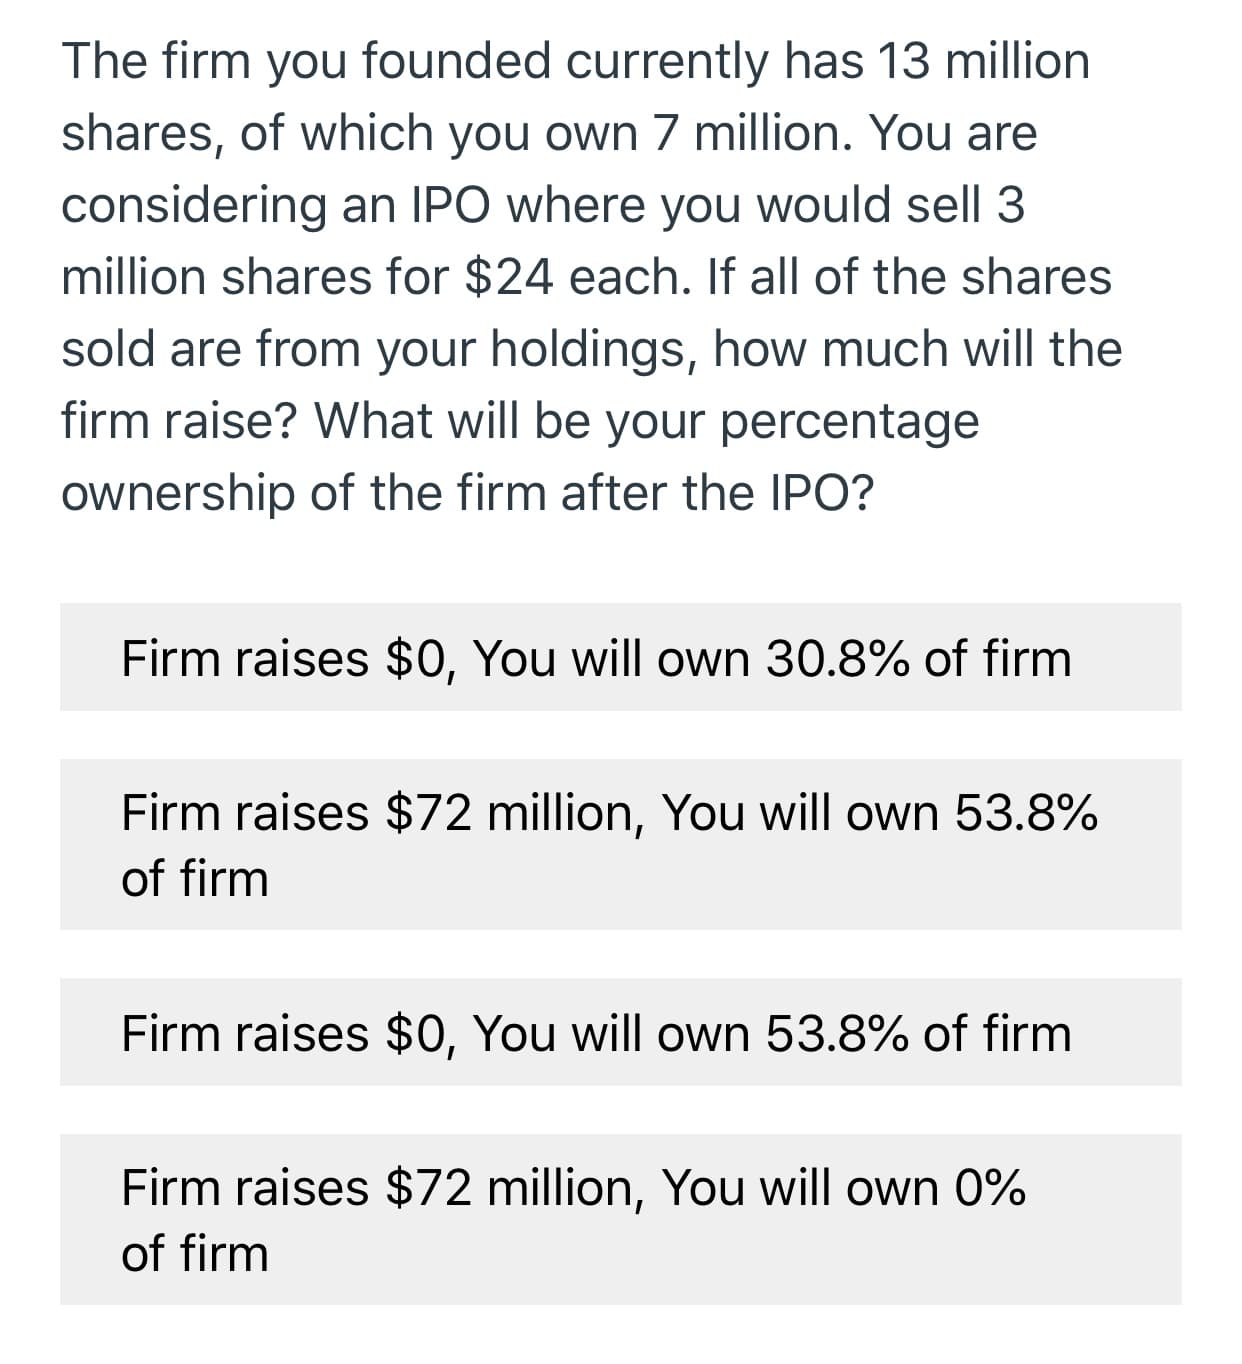 The firm you founded currently has 13 million
shares, of which you own 7 million. You are
considering an IPO where you would sell 3
million shares for $24 each. If all of the shares
sold are from your holdings, how much will the
firm raise? What will be your percentage
ownership of the firm after the IPO?
Firm raises $0, You will own 30.8% of firm
Firm raises $72 million, You will own 53.8%
of firm
Firm raises $0, You will own 53.8% of firm
Firm raises $72 million, You will own 0%
of firm
